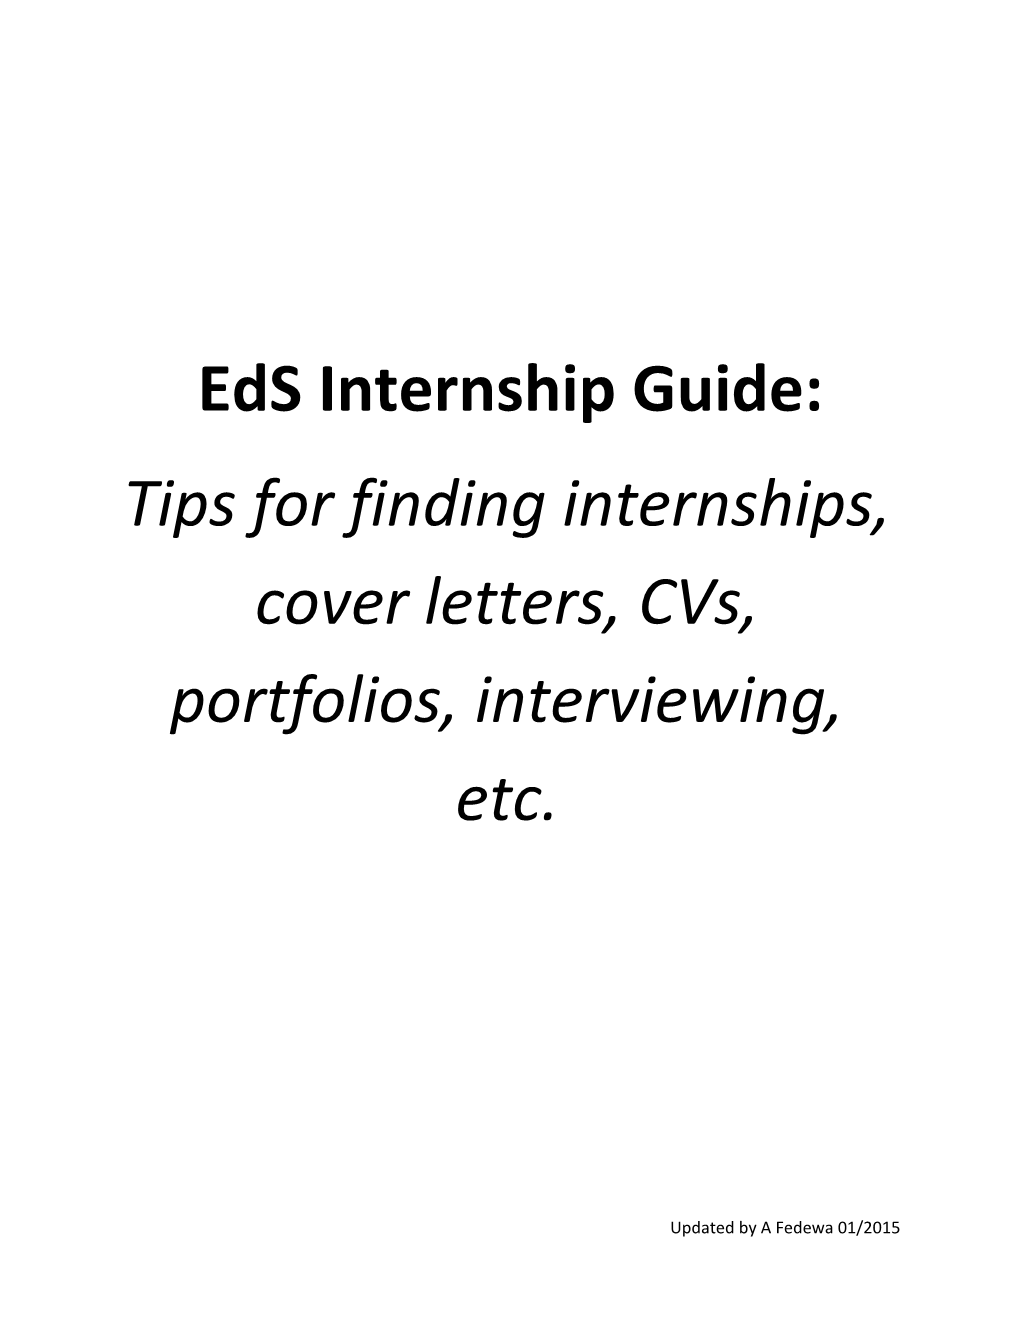 Important Things to Do When Beginning the Internship Search